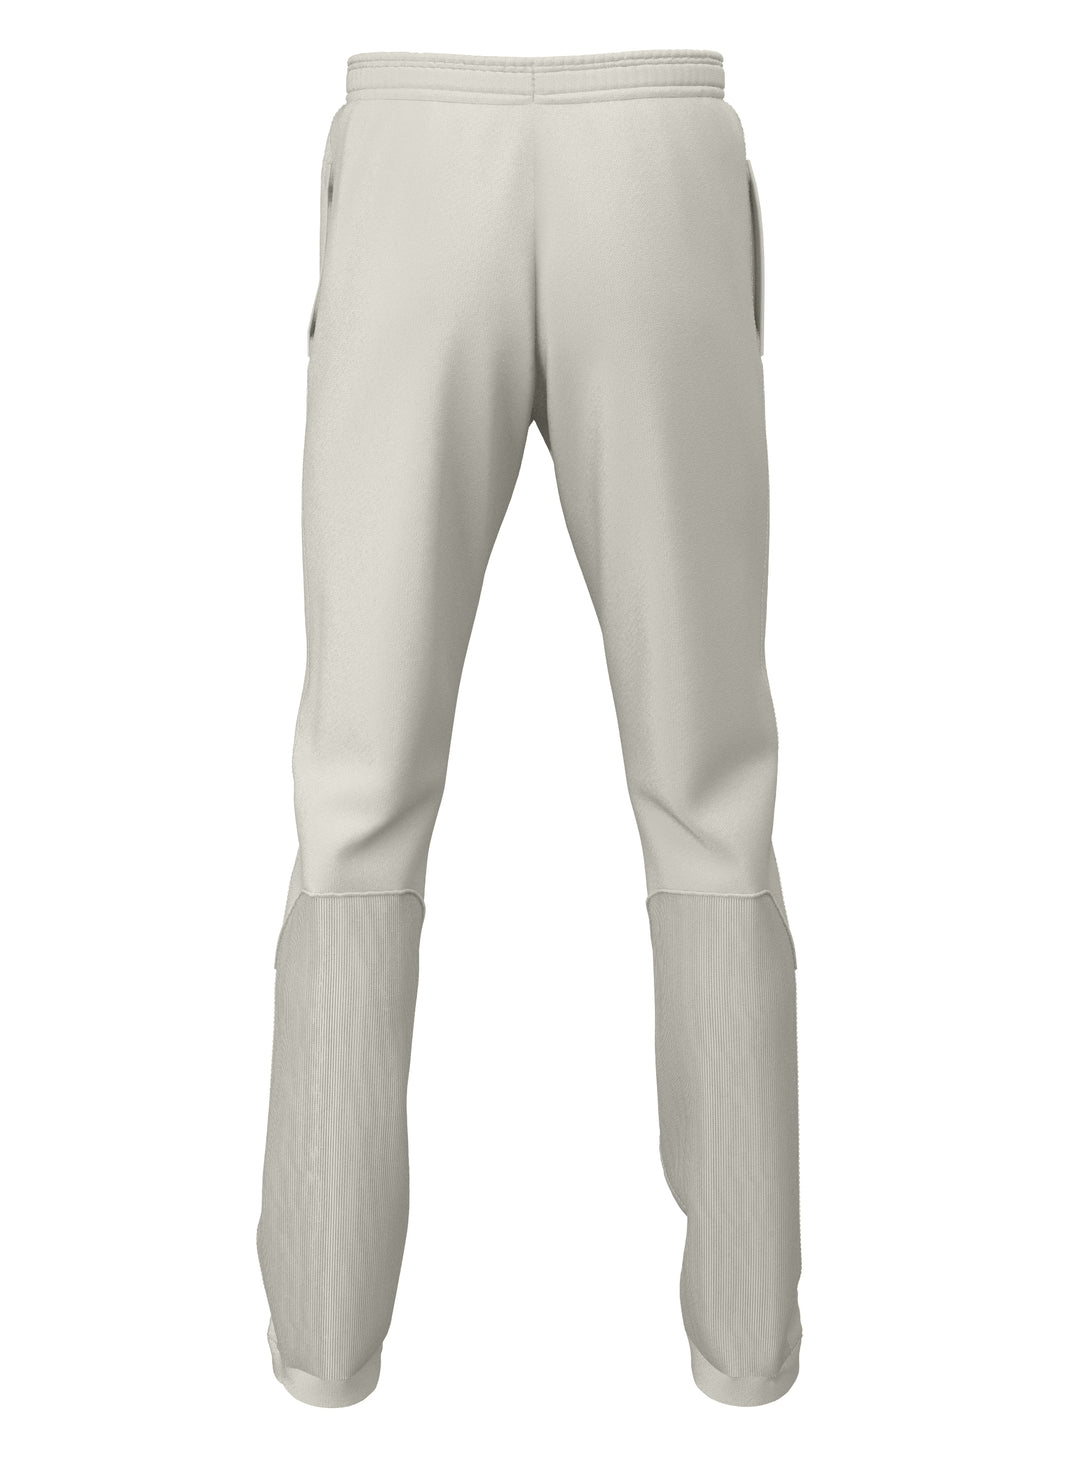 Cricket playing trousers